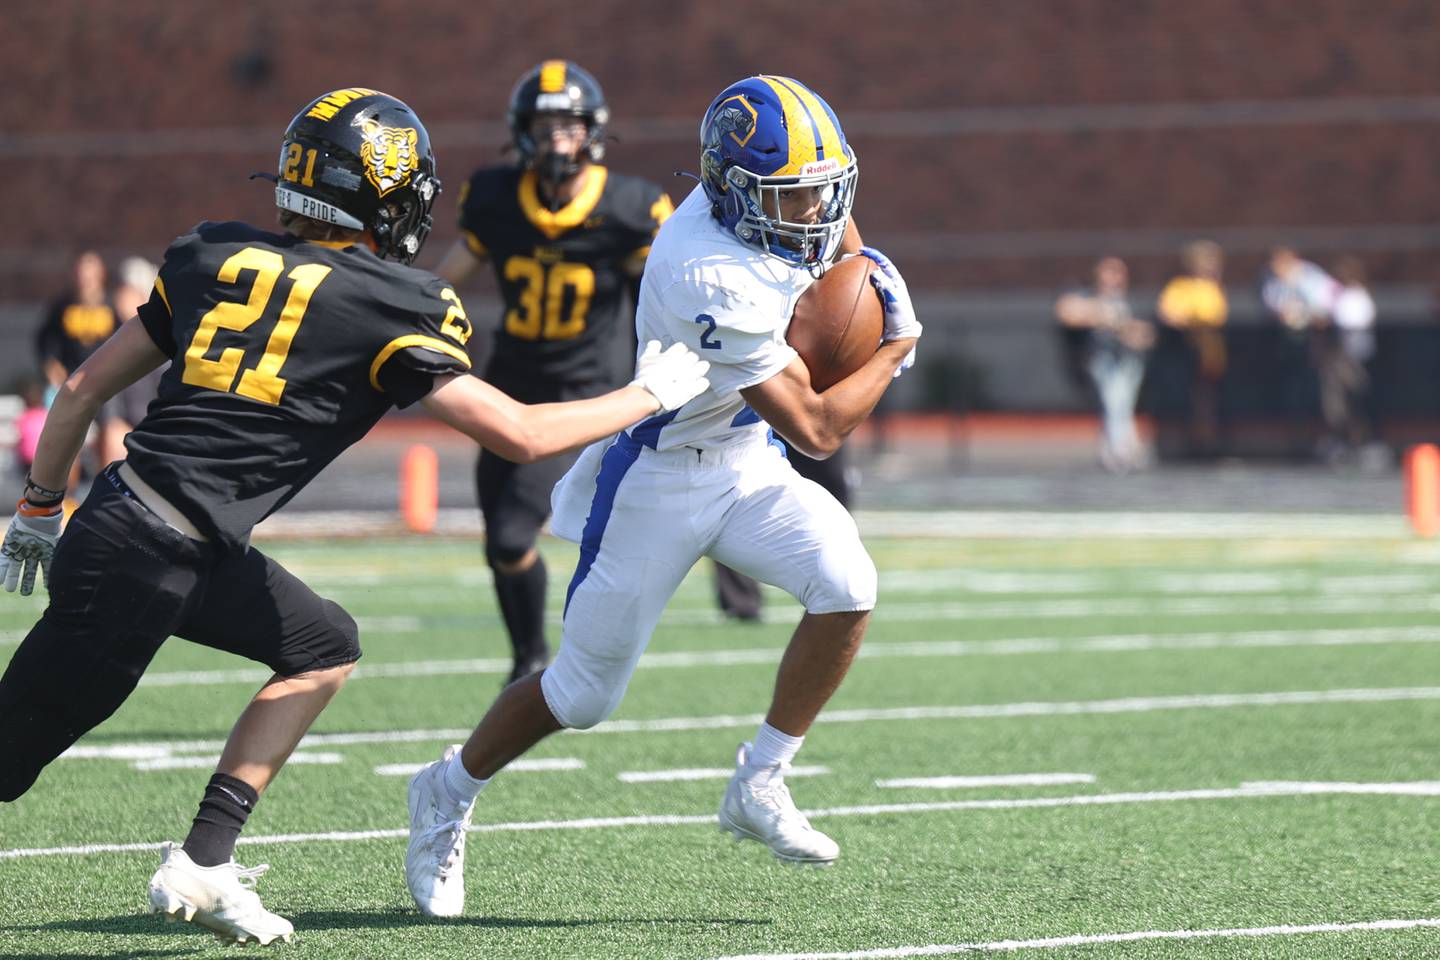 Joliet Central’s Christian Smith heads upfield after a catch against Joliet West on Saturday, Sept. 23, 2023 in Joliet.